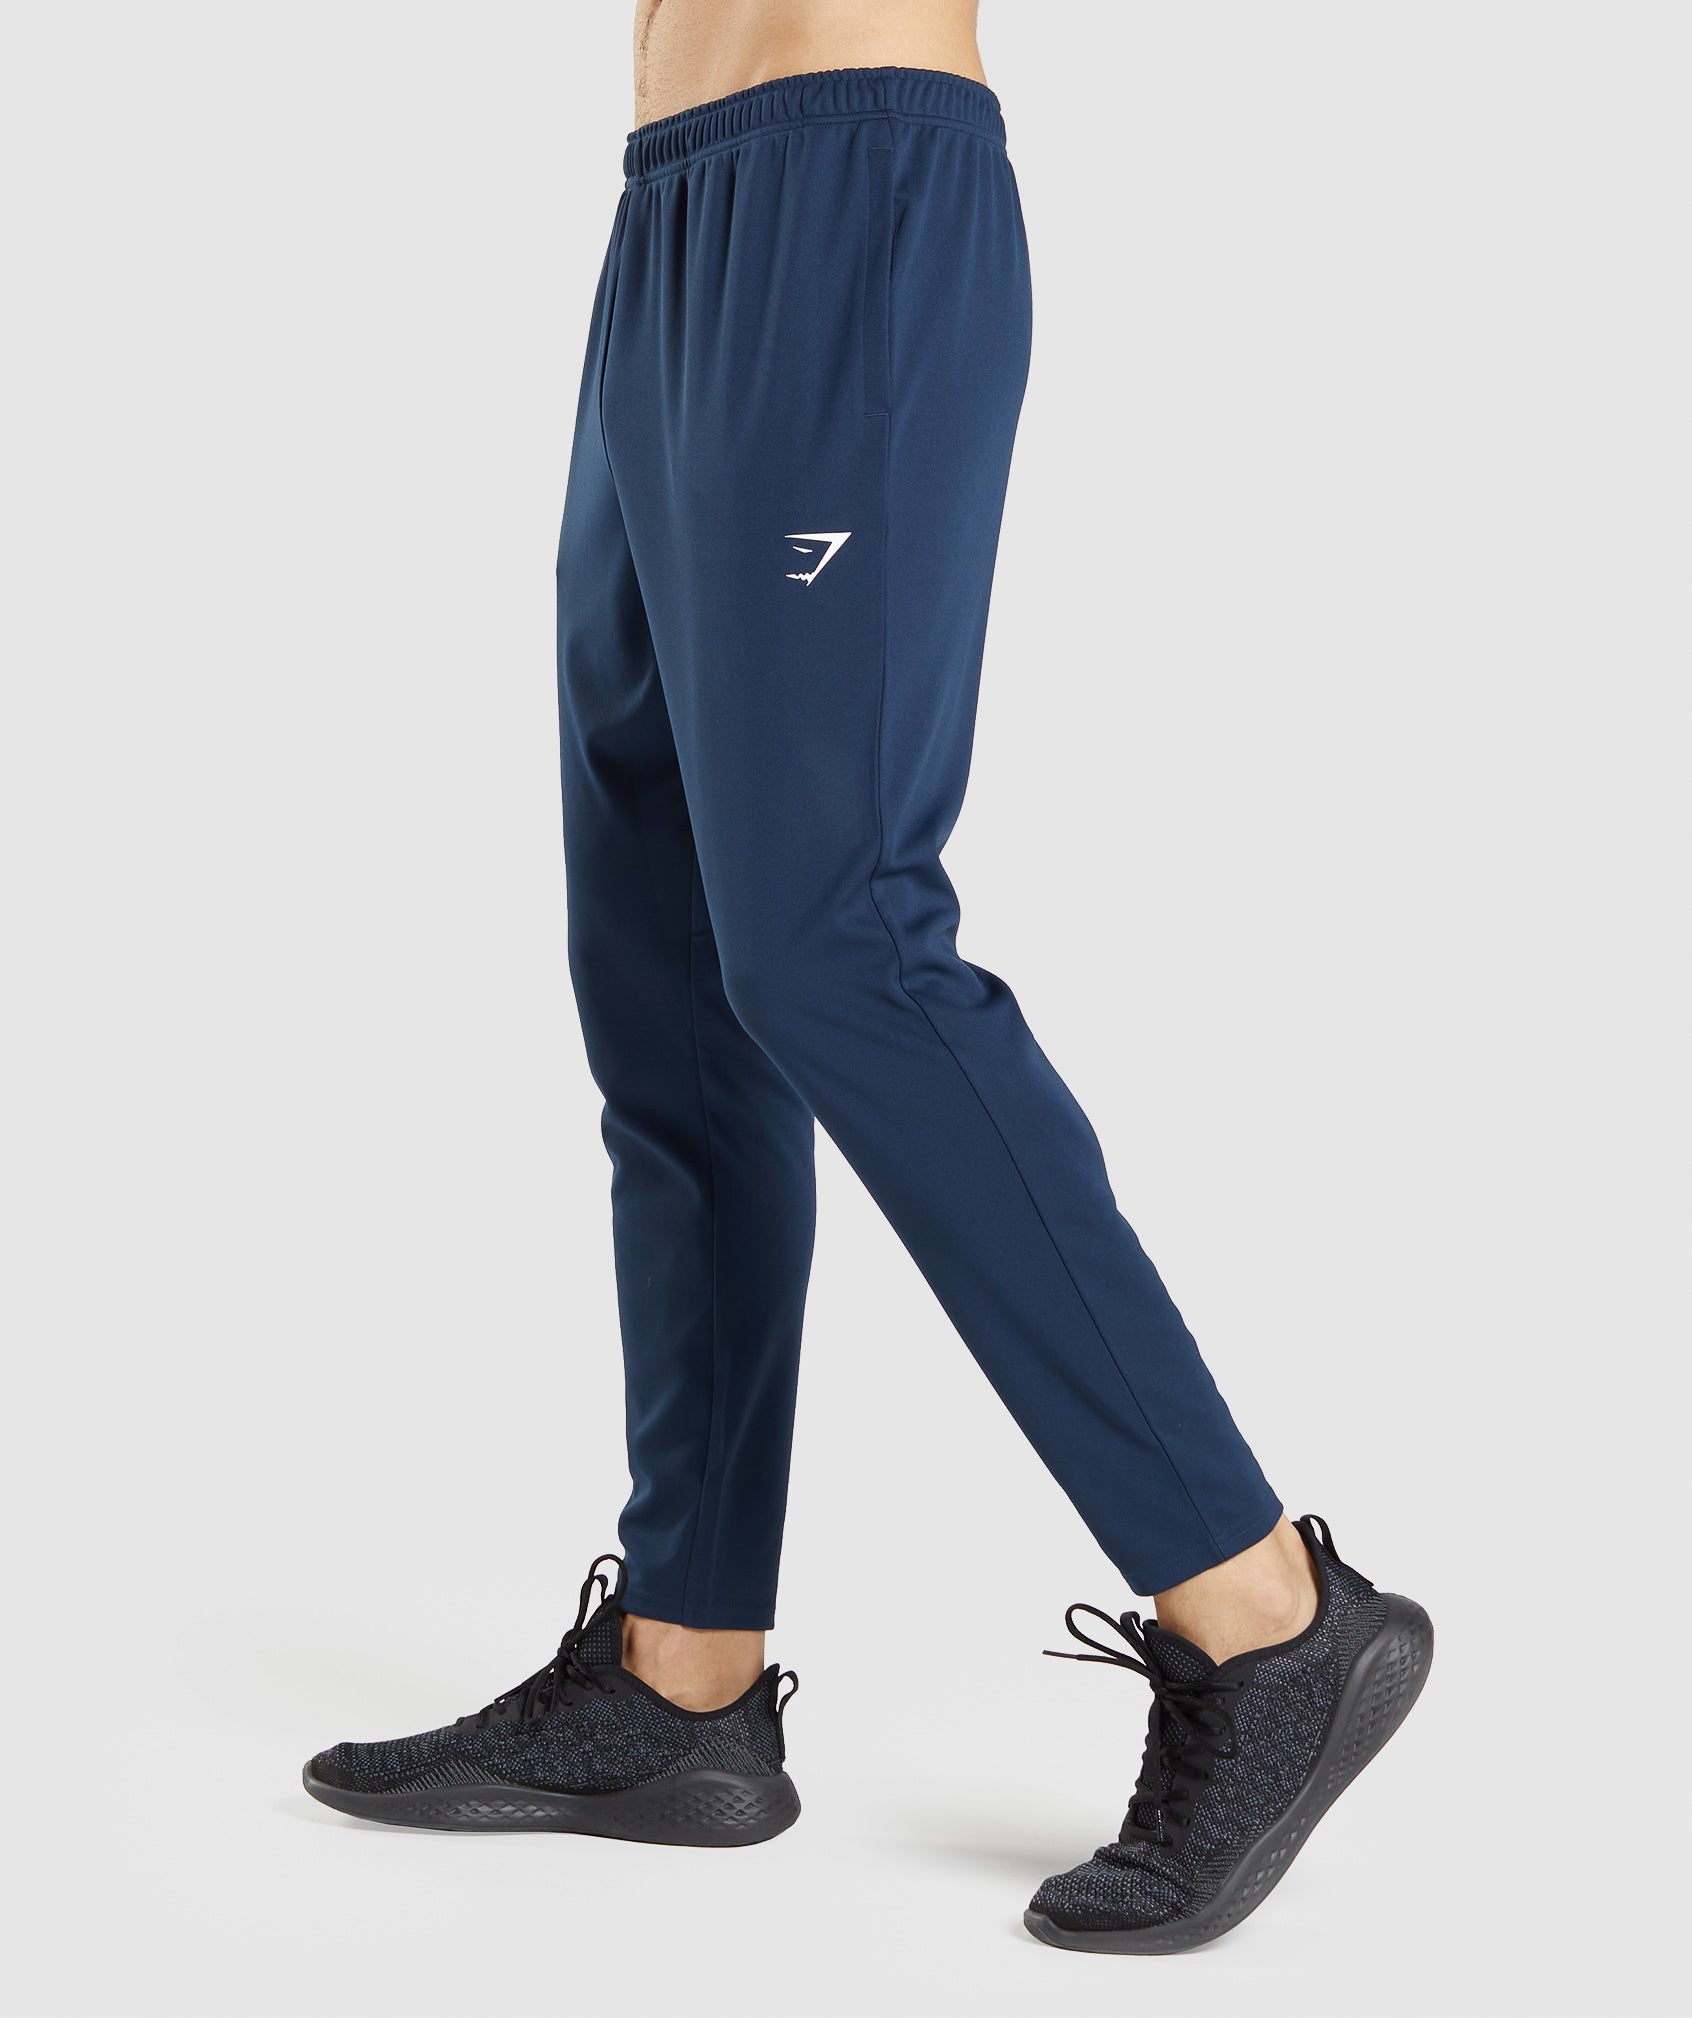 Arrival Knit Joggers in Navy - view 3